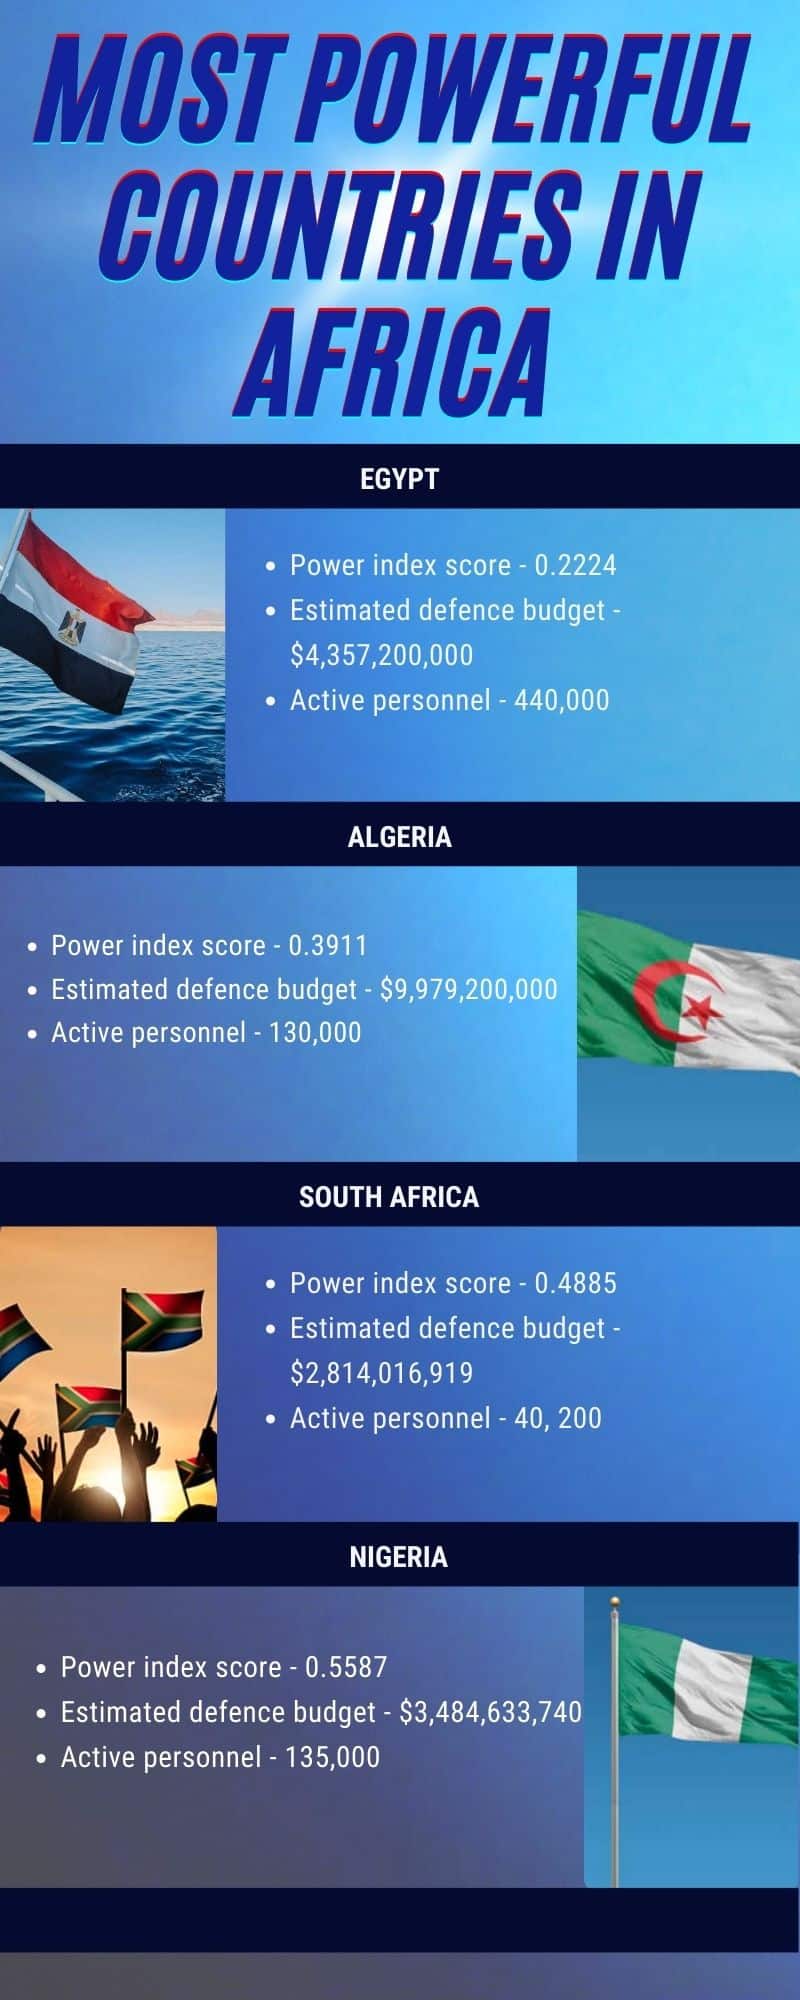 Most powerful countries in Africa